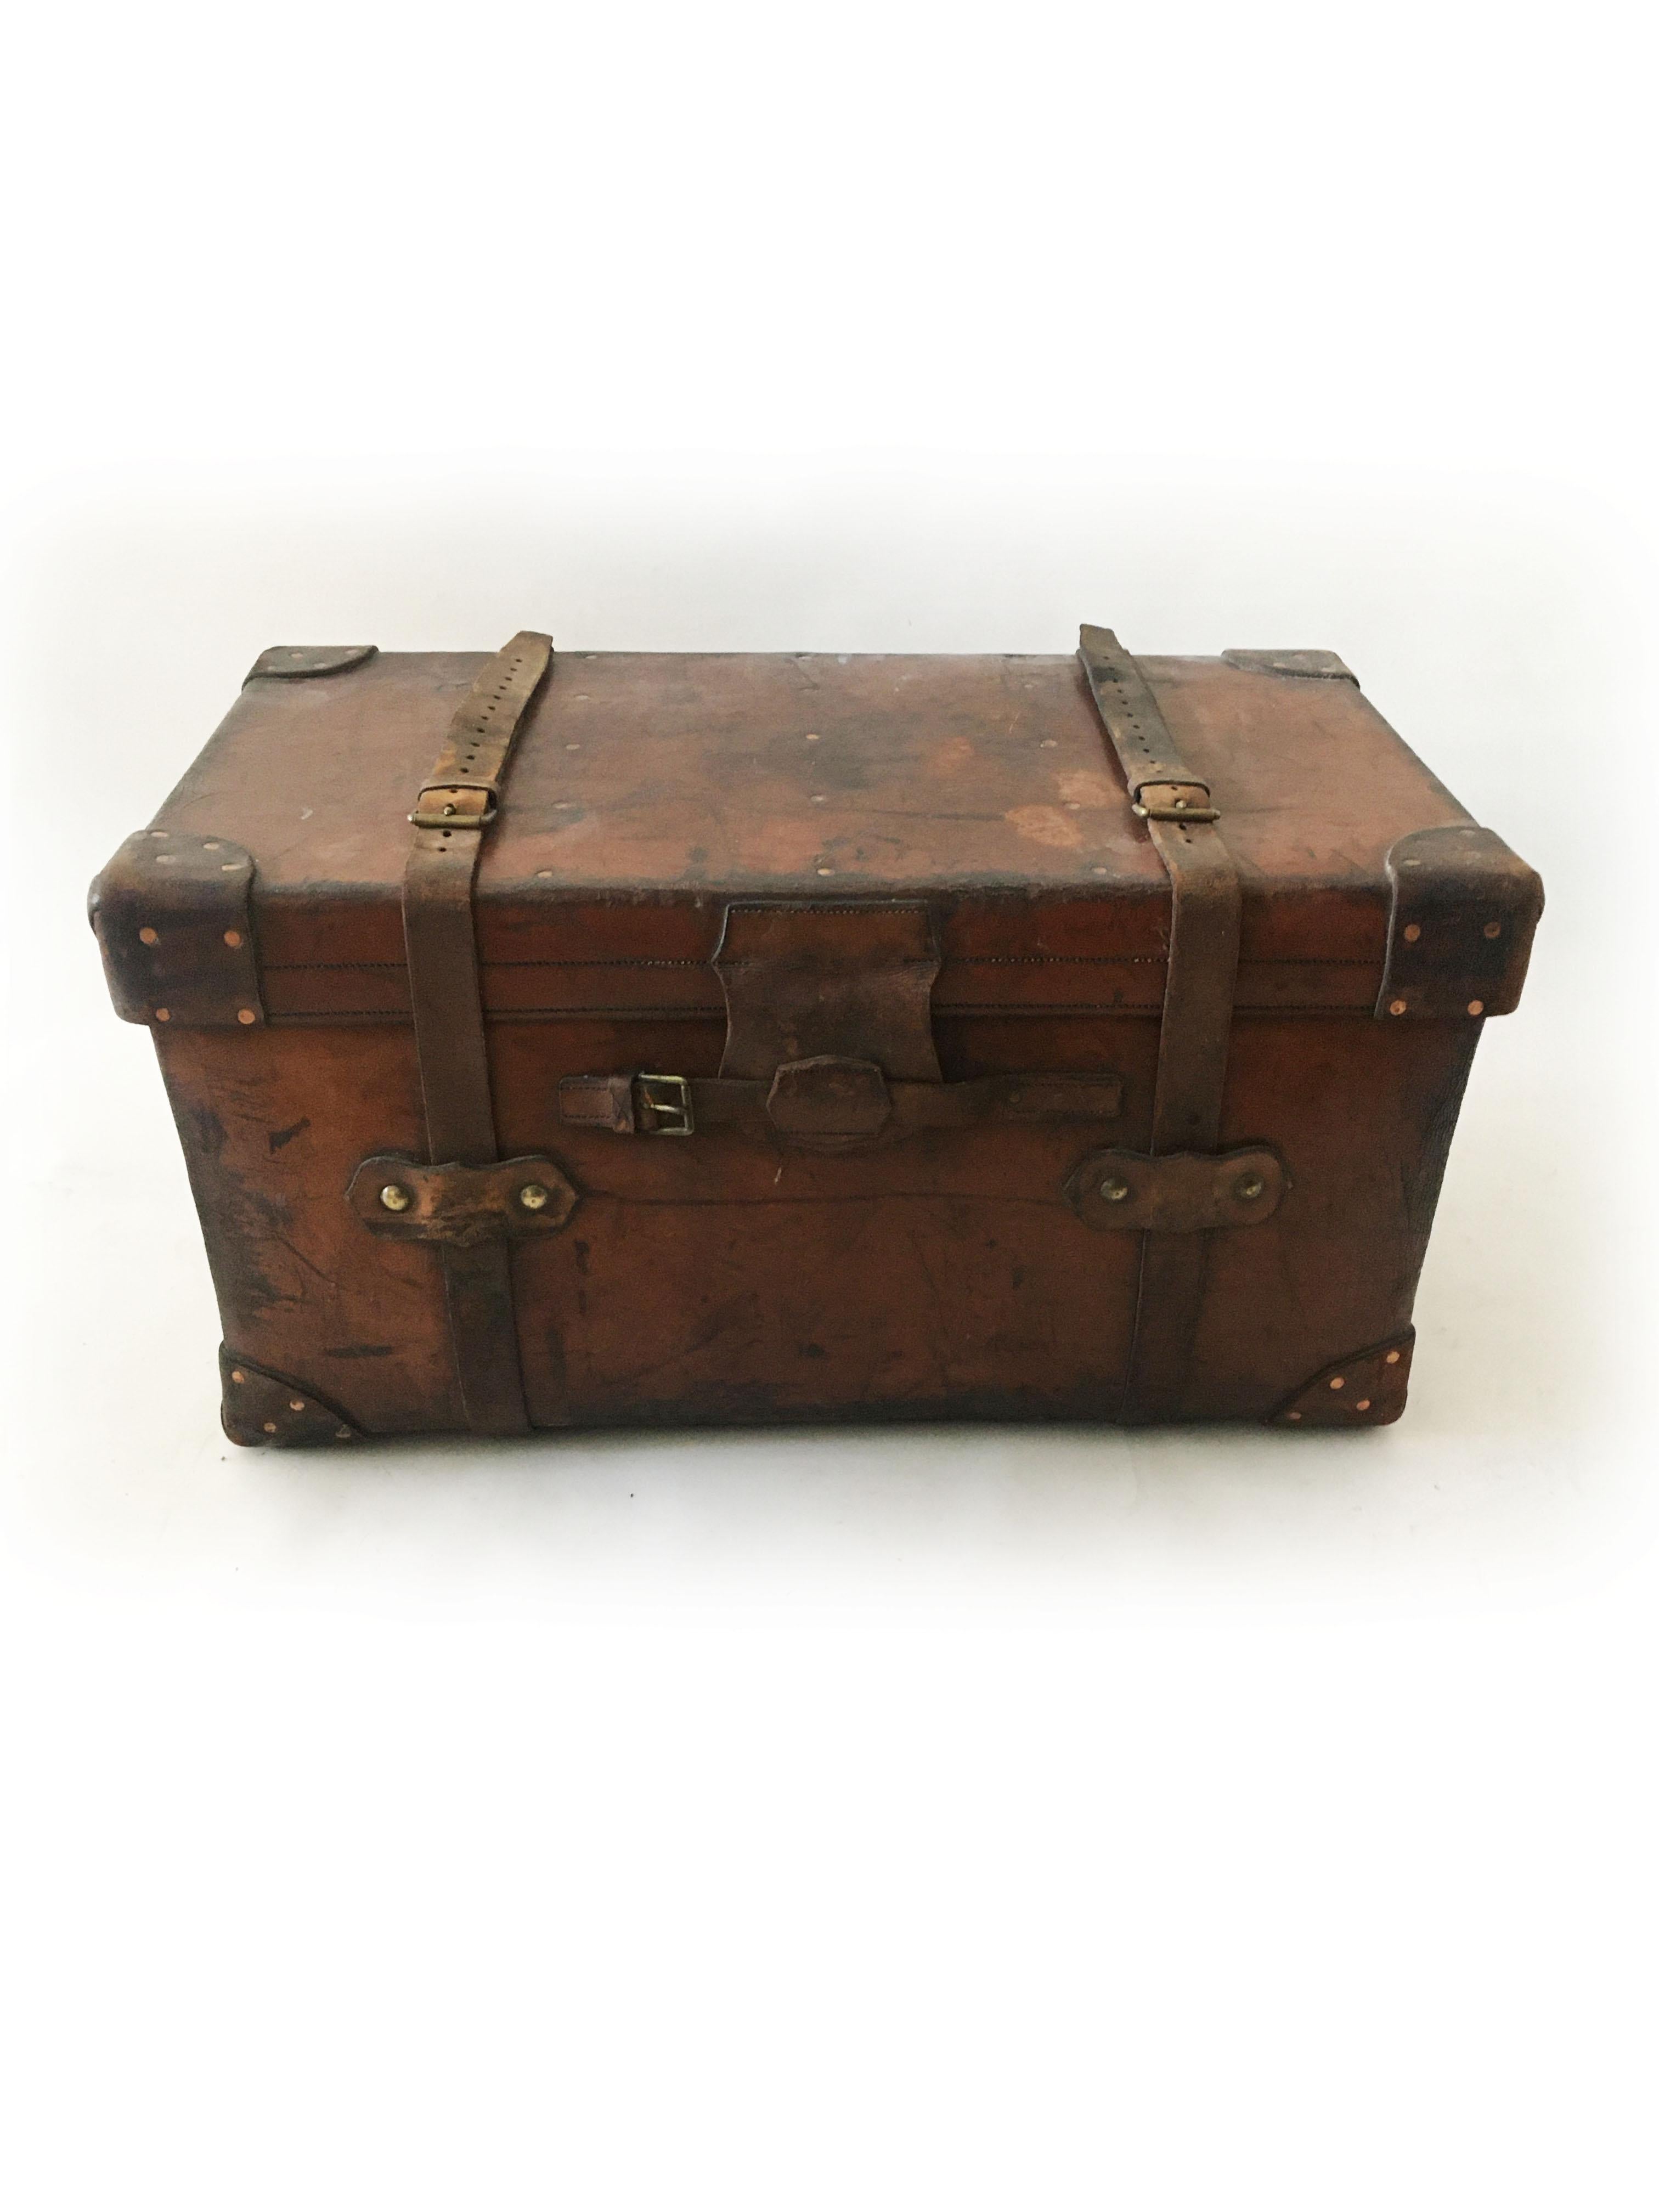 A tremendous 1900s leather trunk by Asprey London, with initials T.B. From its central London location, Asprey advertised 'articles of exclusive design and high quality, whether for personal adornment or personal accompaniment and to endow with